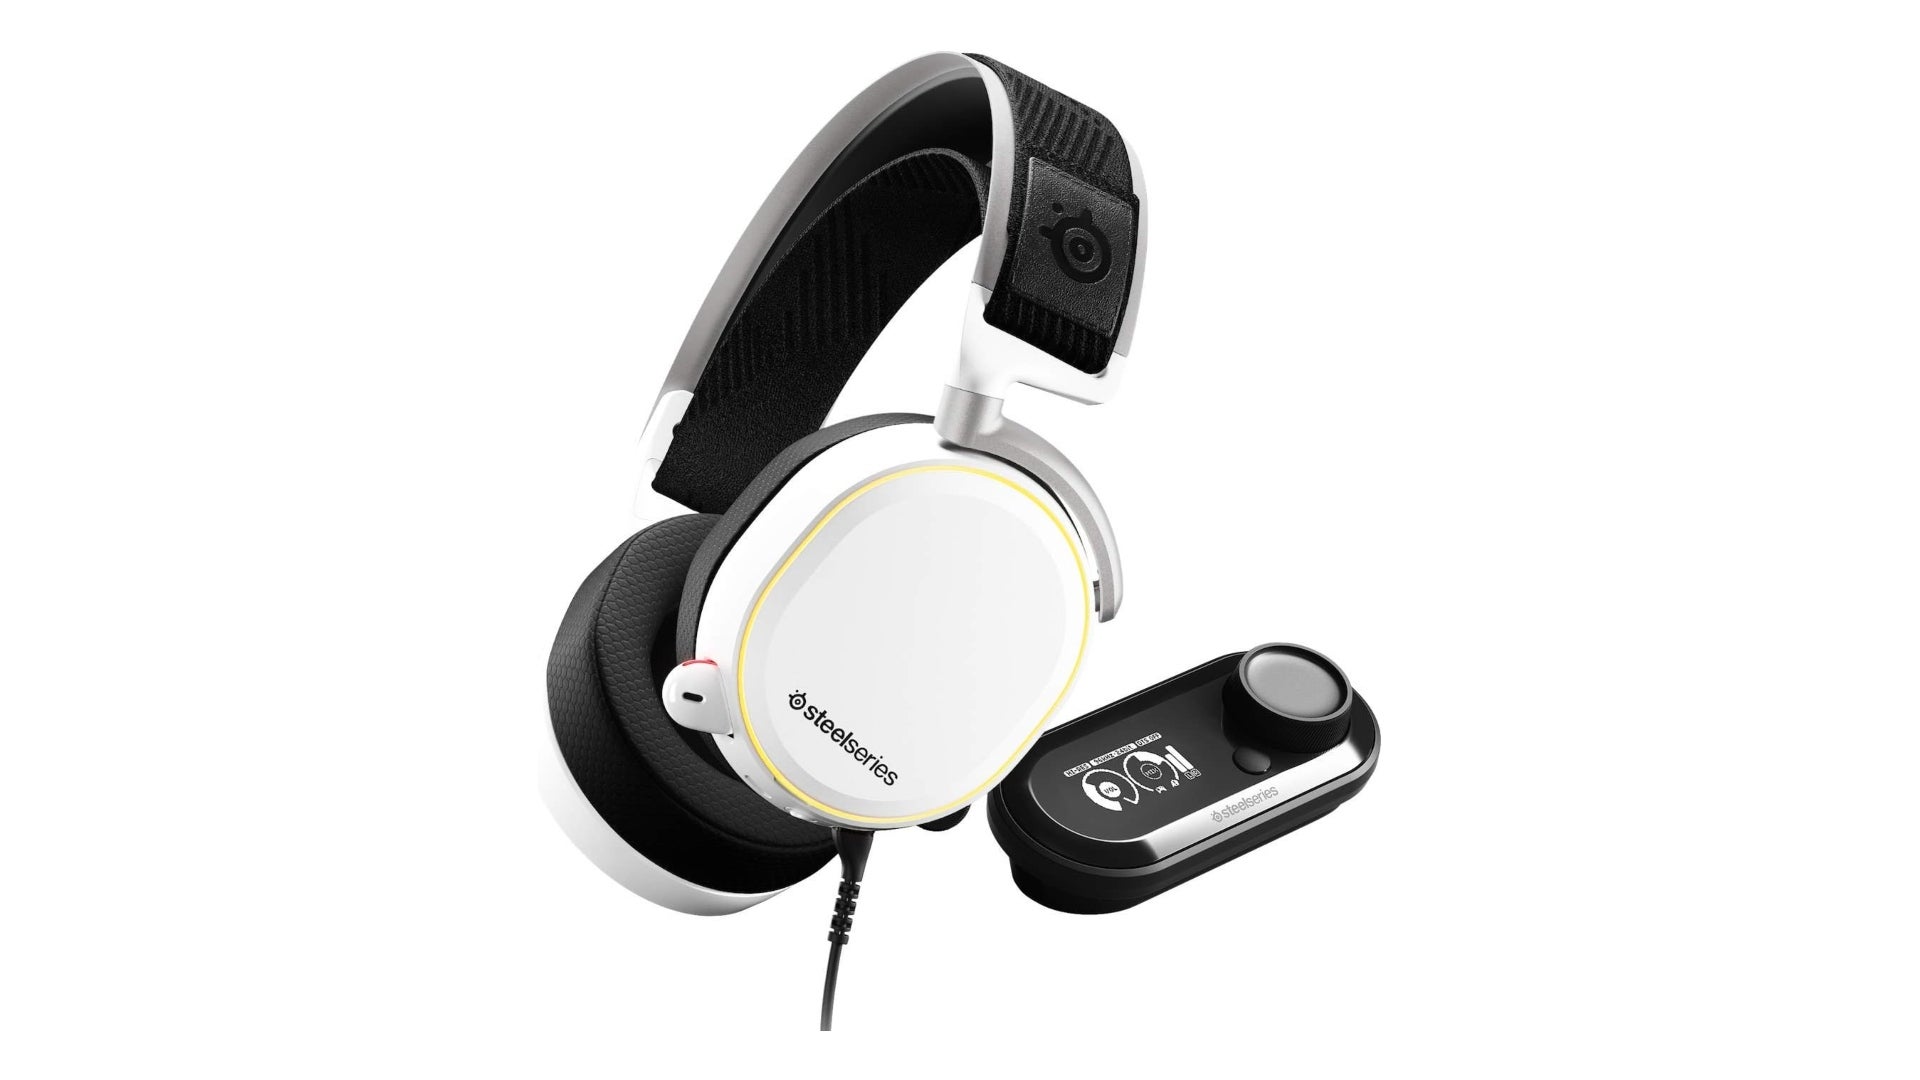 Grab the excellent SteelSeries Arctis Pro with GameDAC for